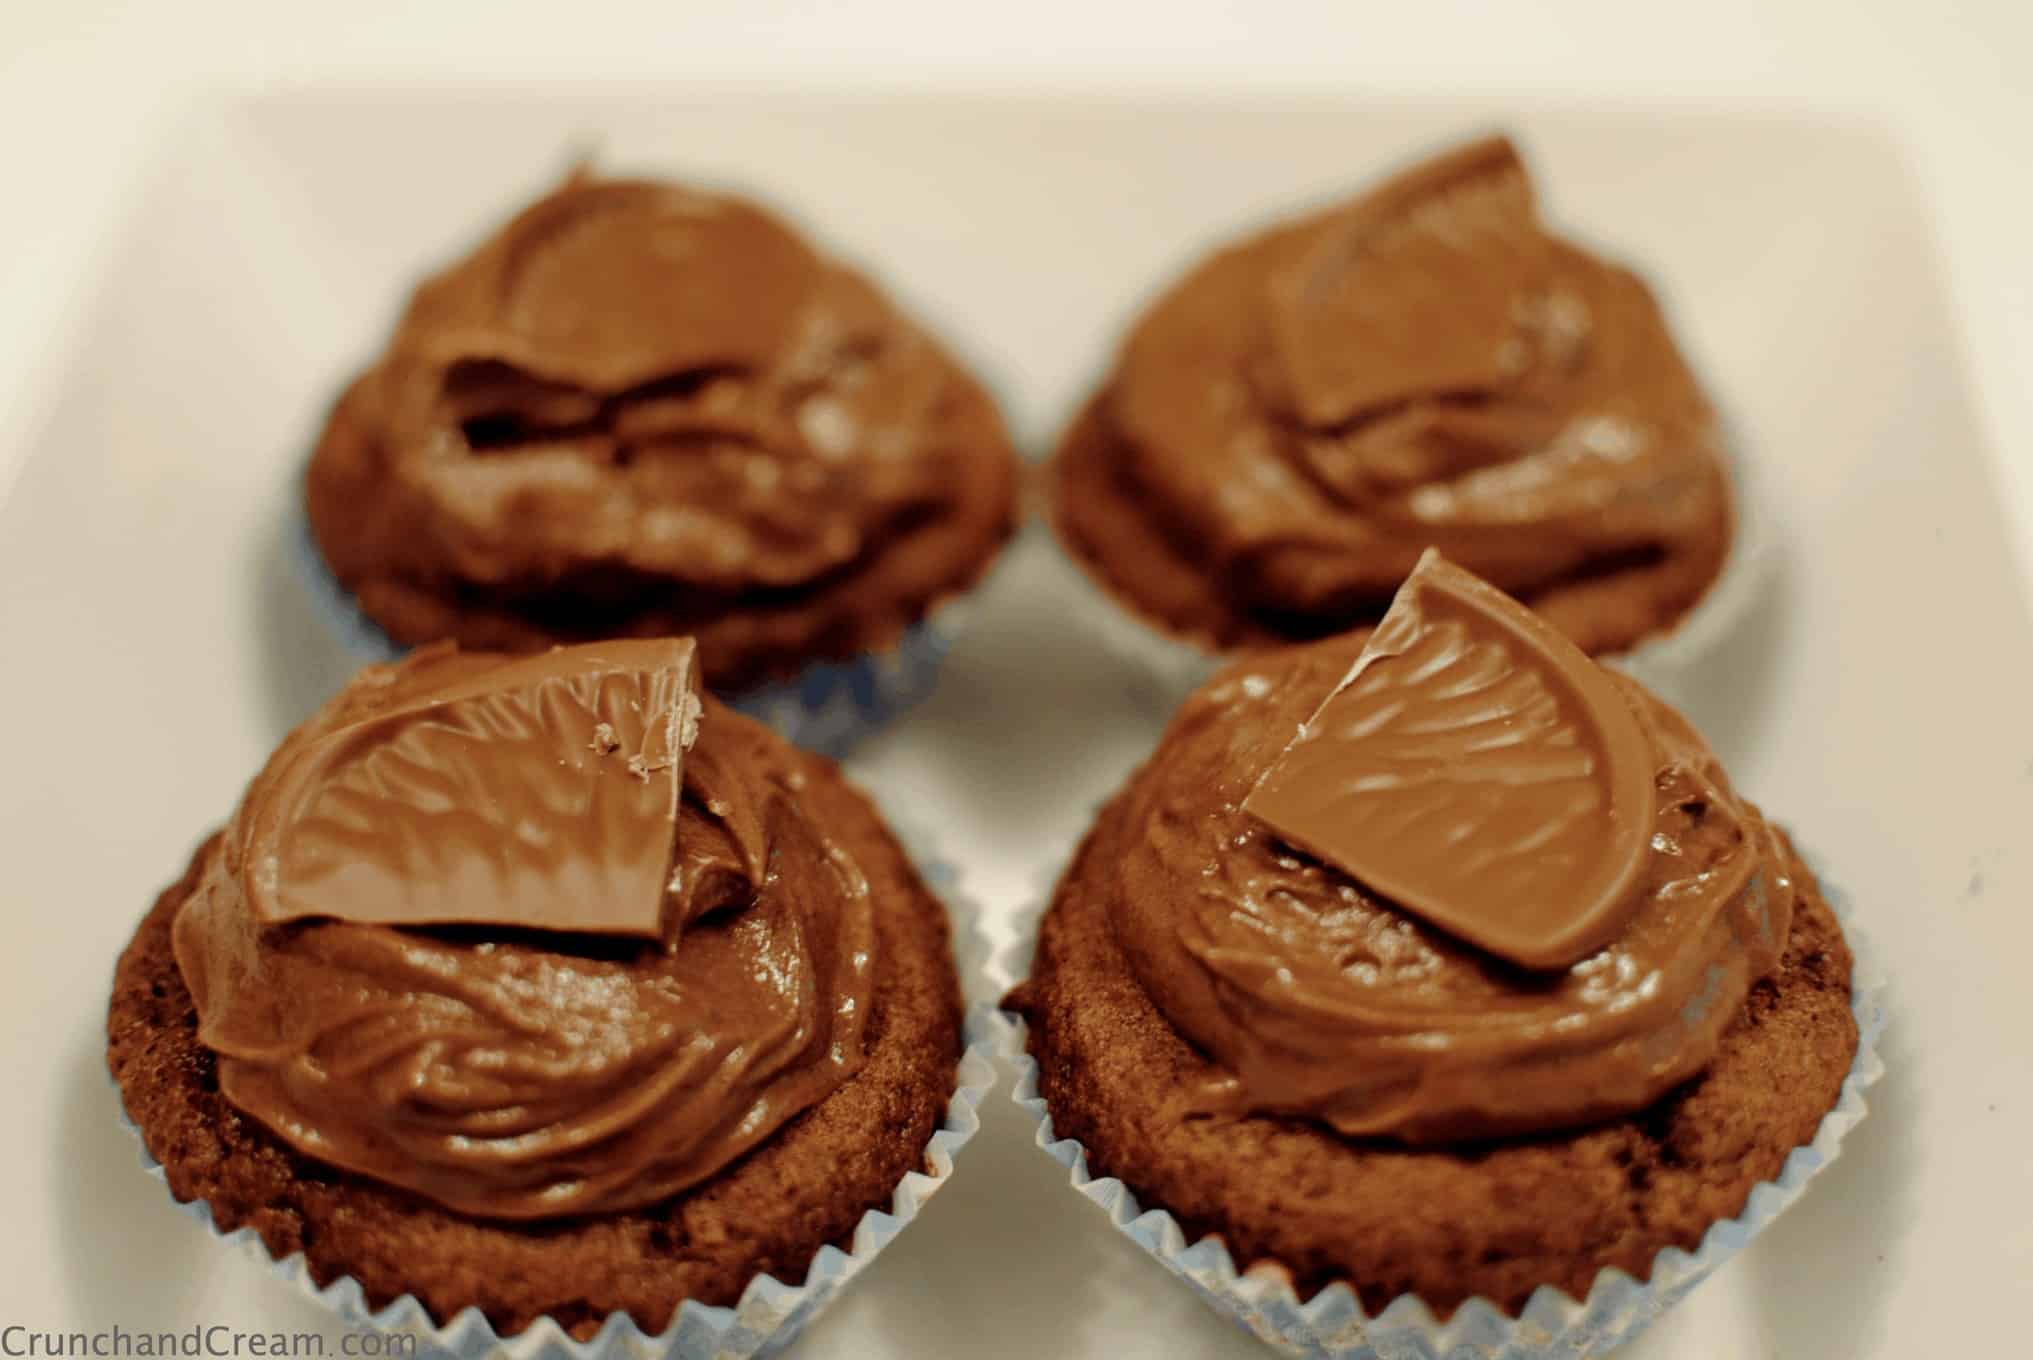 4 chocolate orange cupcakes in a bowl, topped with chocolate buttercream and a piece of chocolate orange.